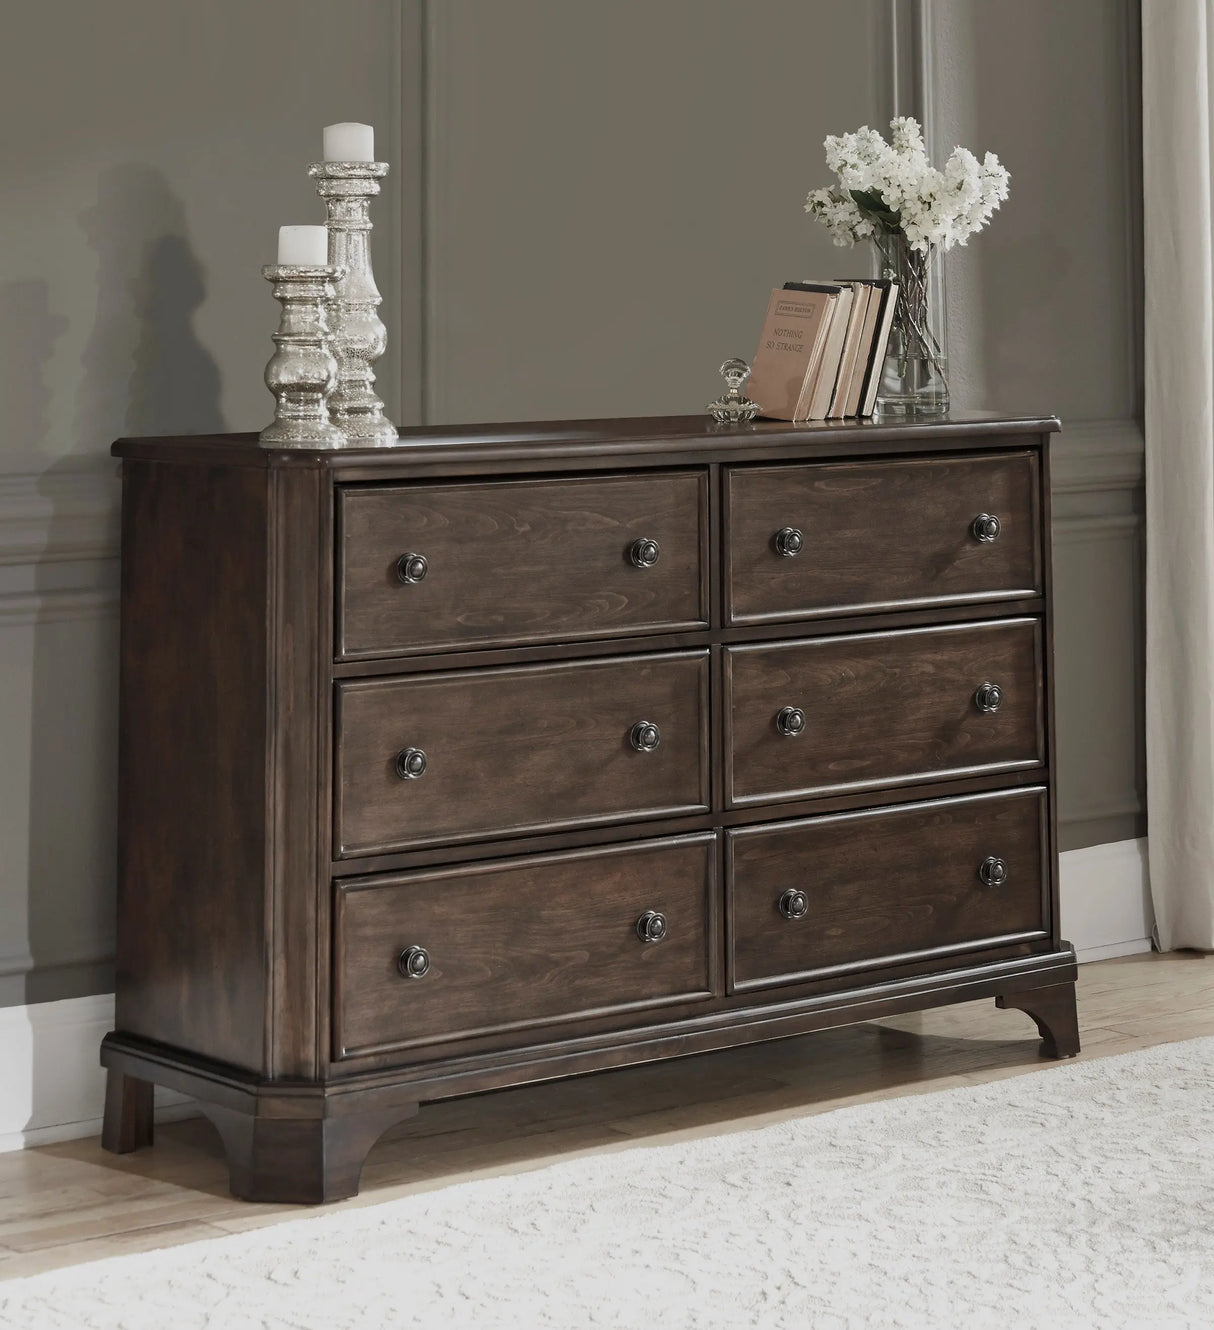 Adinton Traditional Dresser in Brown by Ashley Furniture Ashley Furniture